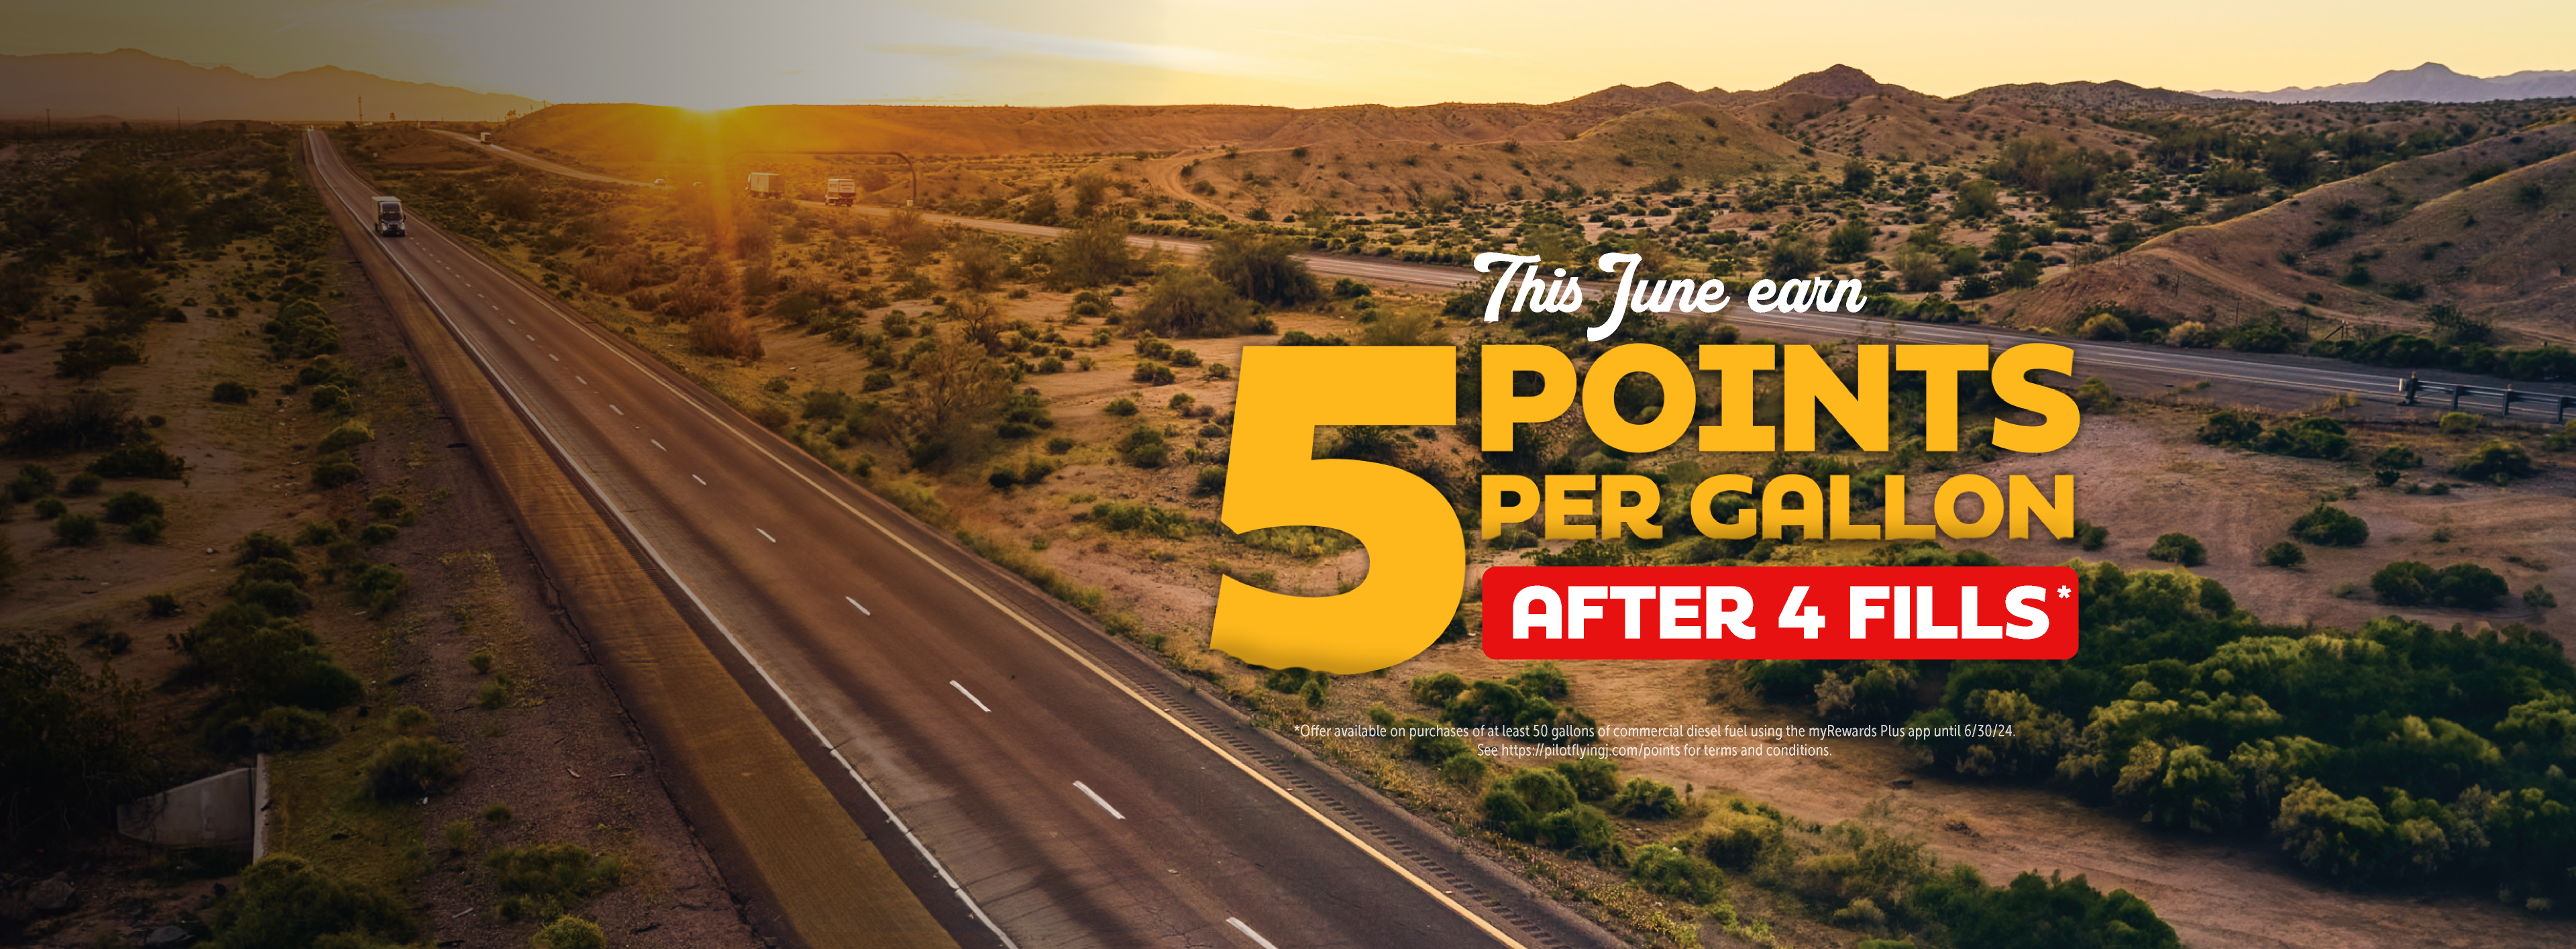 This June Earn 5 Points Per Gallon After 4 Fills